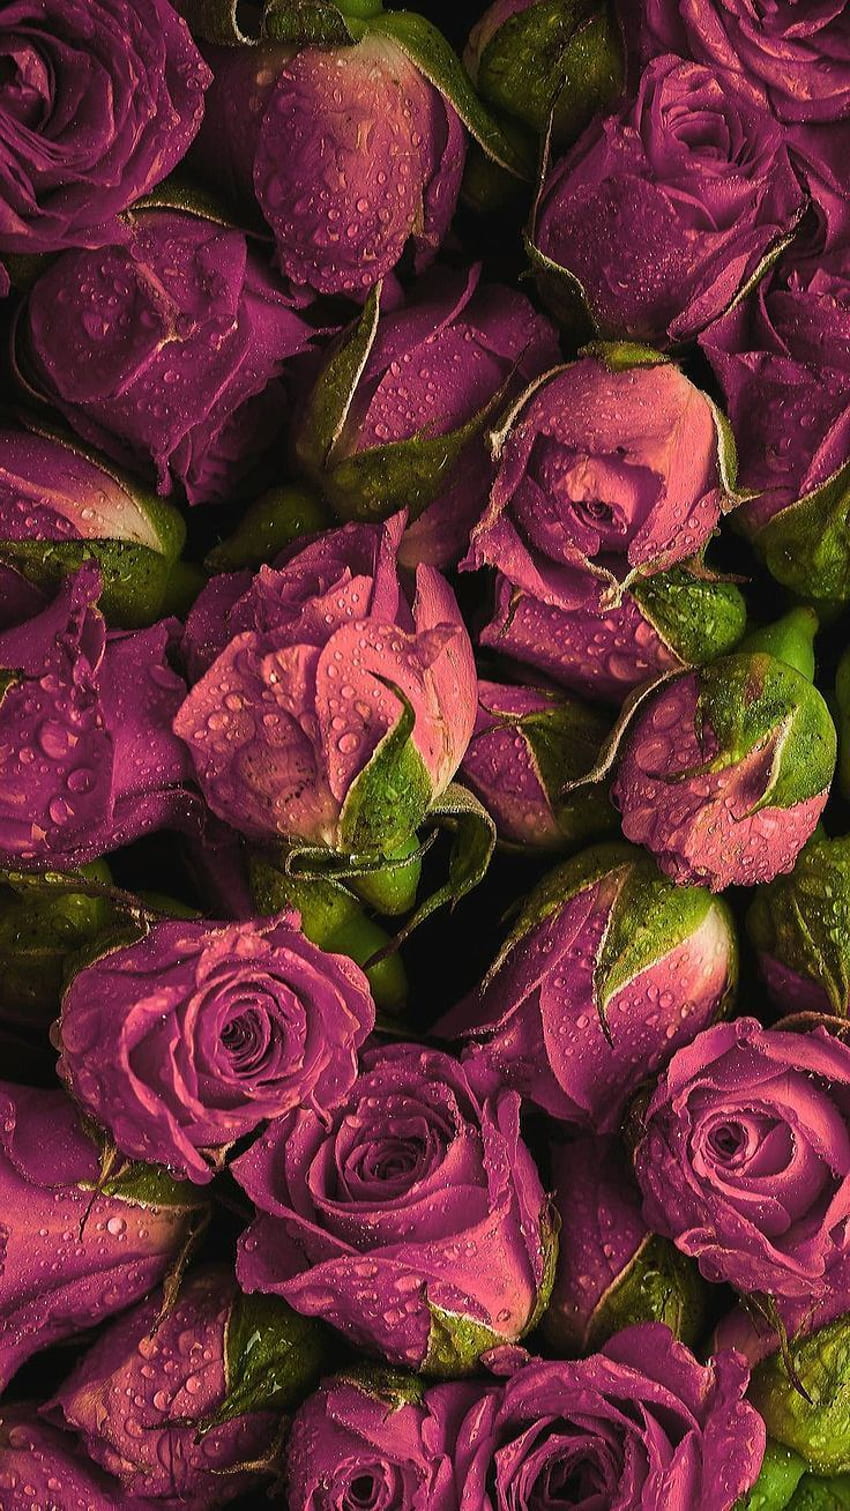 A bunch of purple roses with water droplets on them. - Magenta